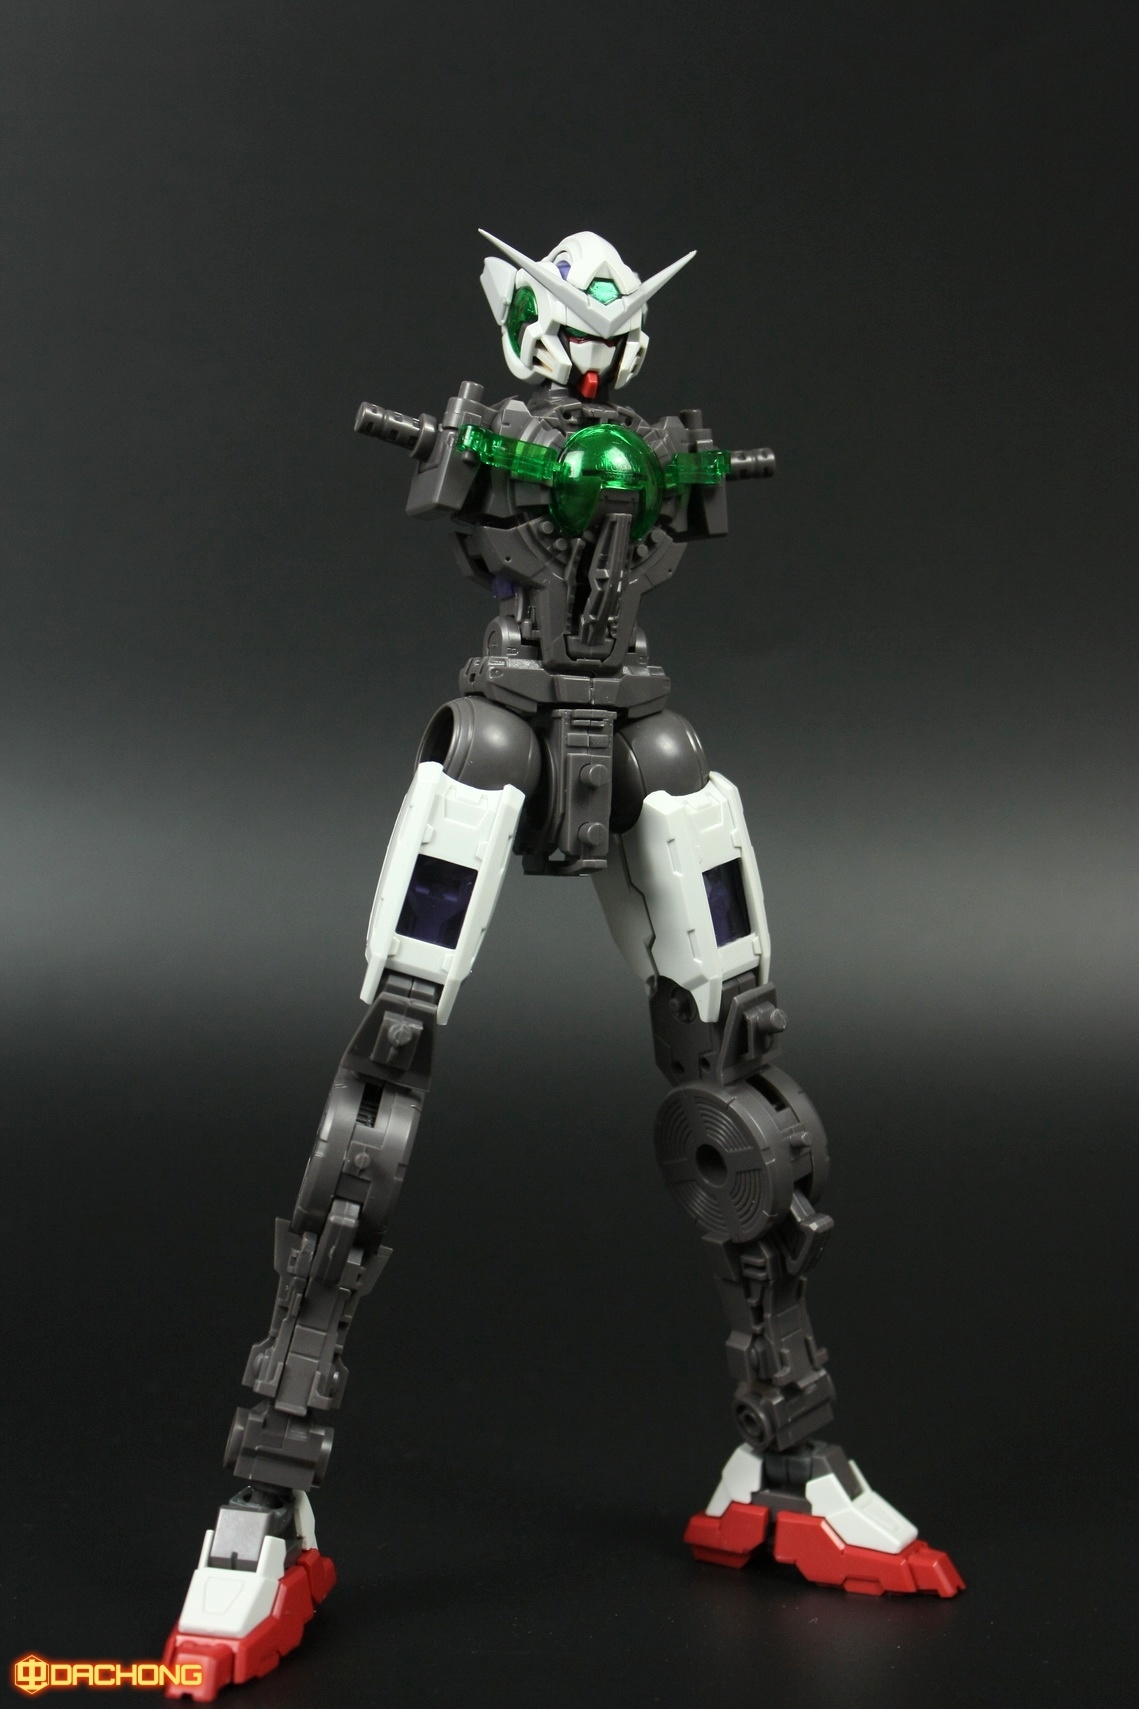 S254_MG_exia_HS_review_inask_037.jpg